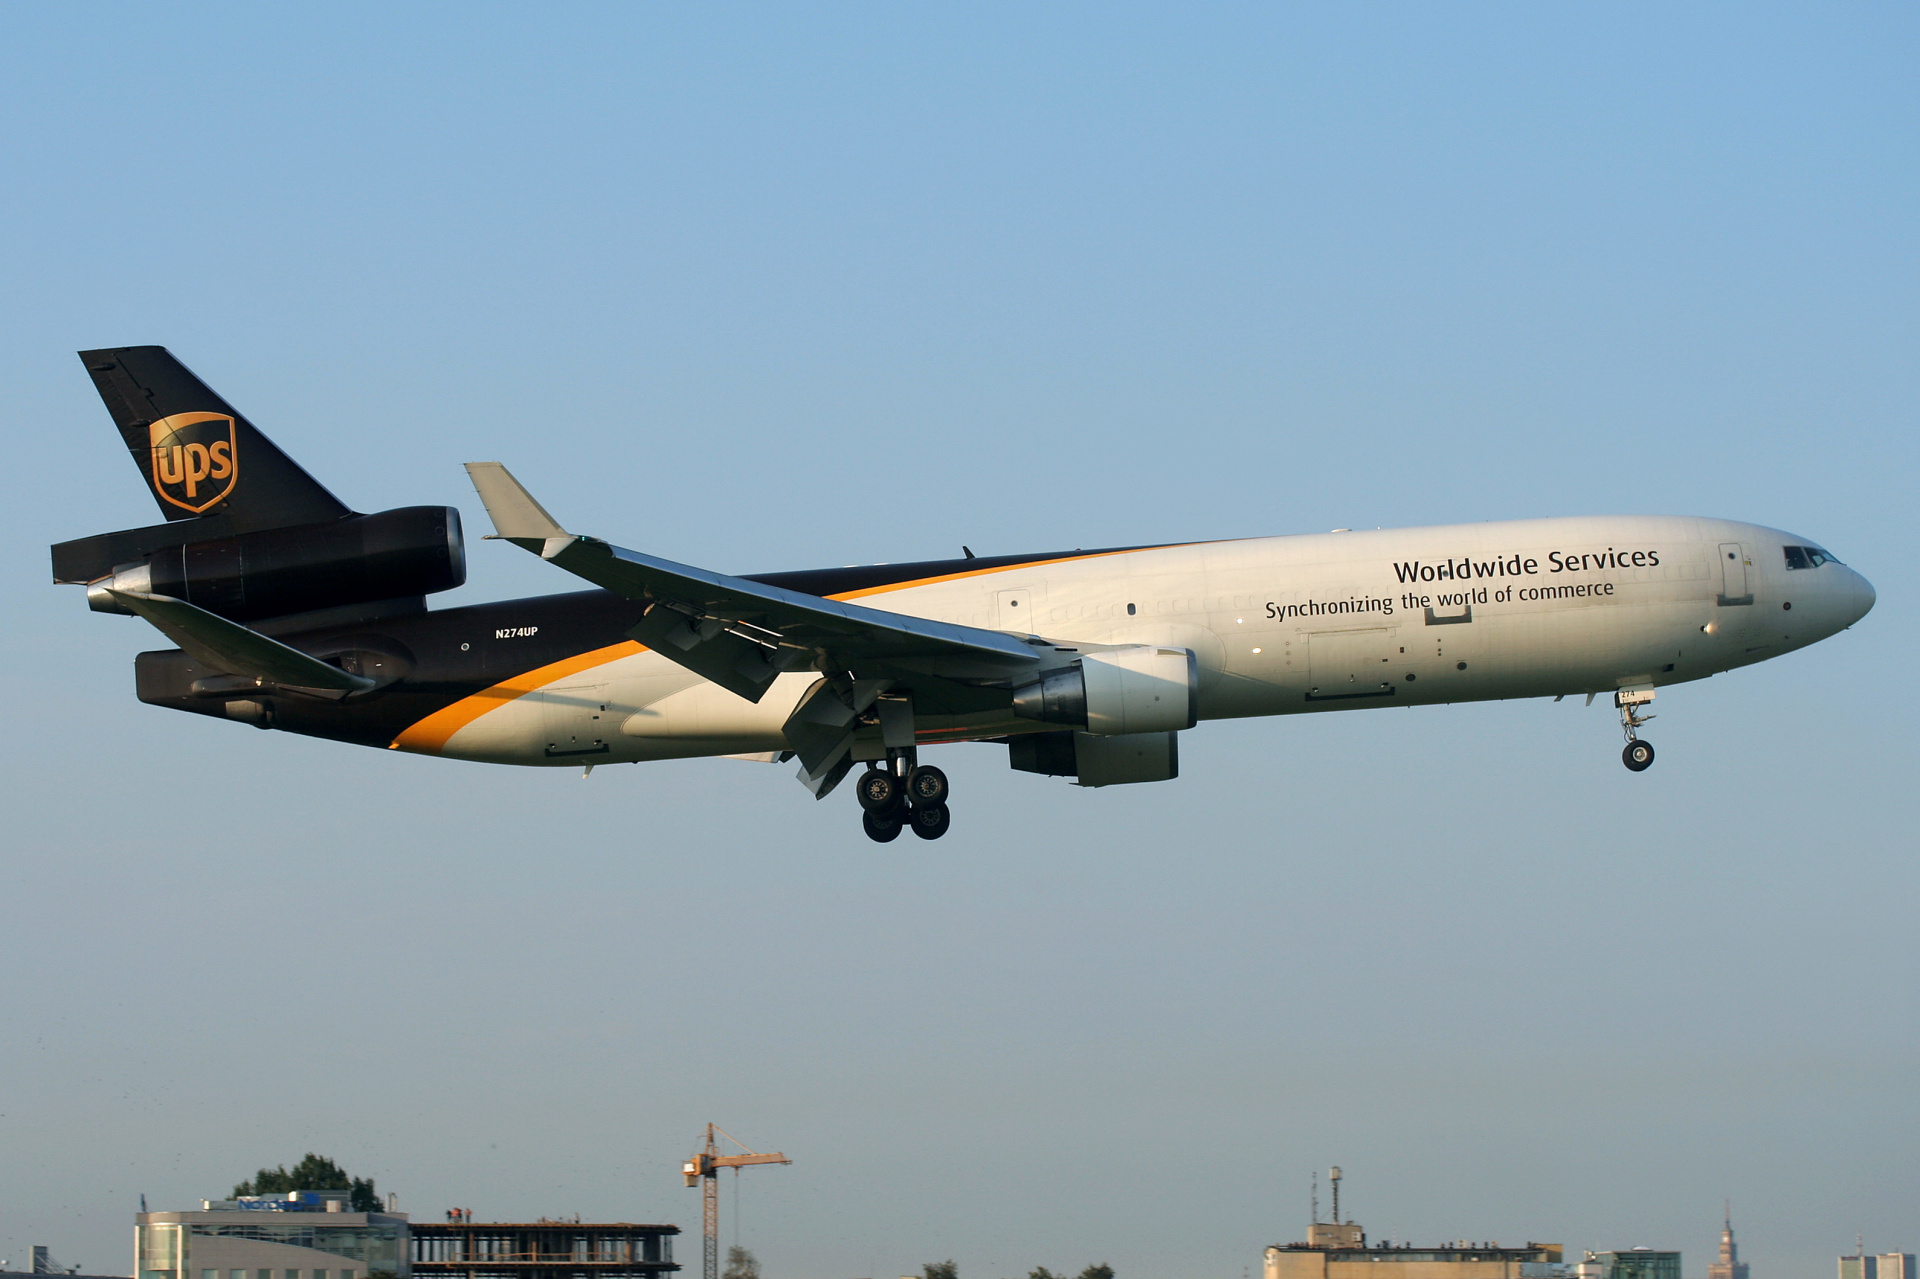 N274UP, United Parcel Service (UPS) Airlines (Aircraft » EPWA Spotting » McDonnell Douglas MD-11F)